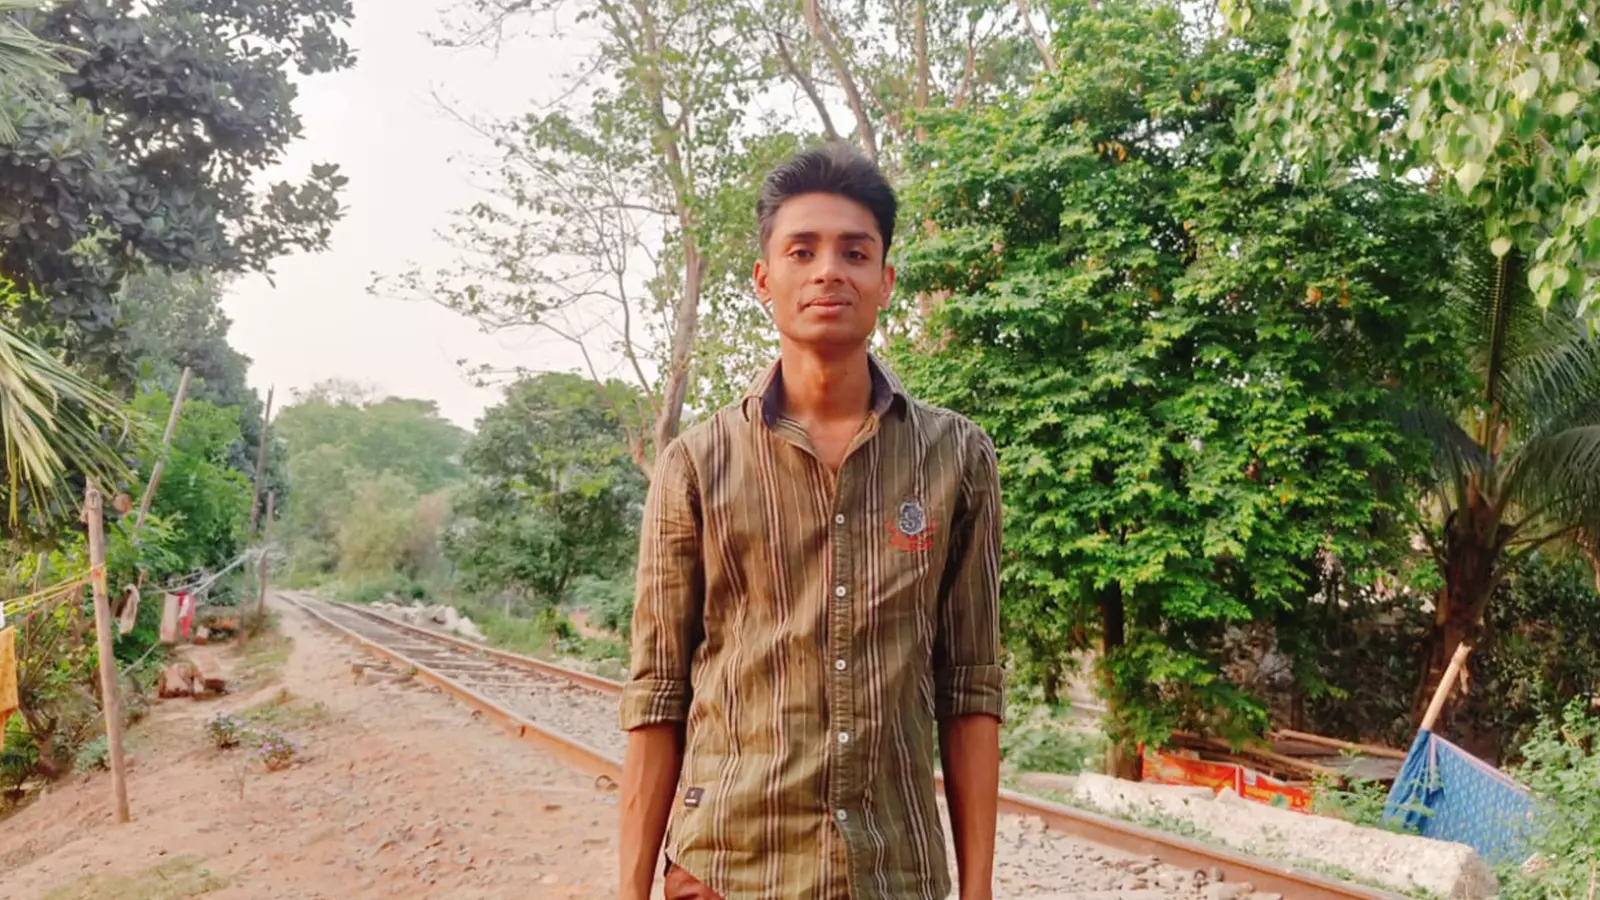 Mujhibur Khan, 20, is from Babu Basti. He is pursuing his graduation from a college in the city.